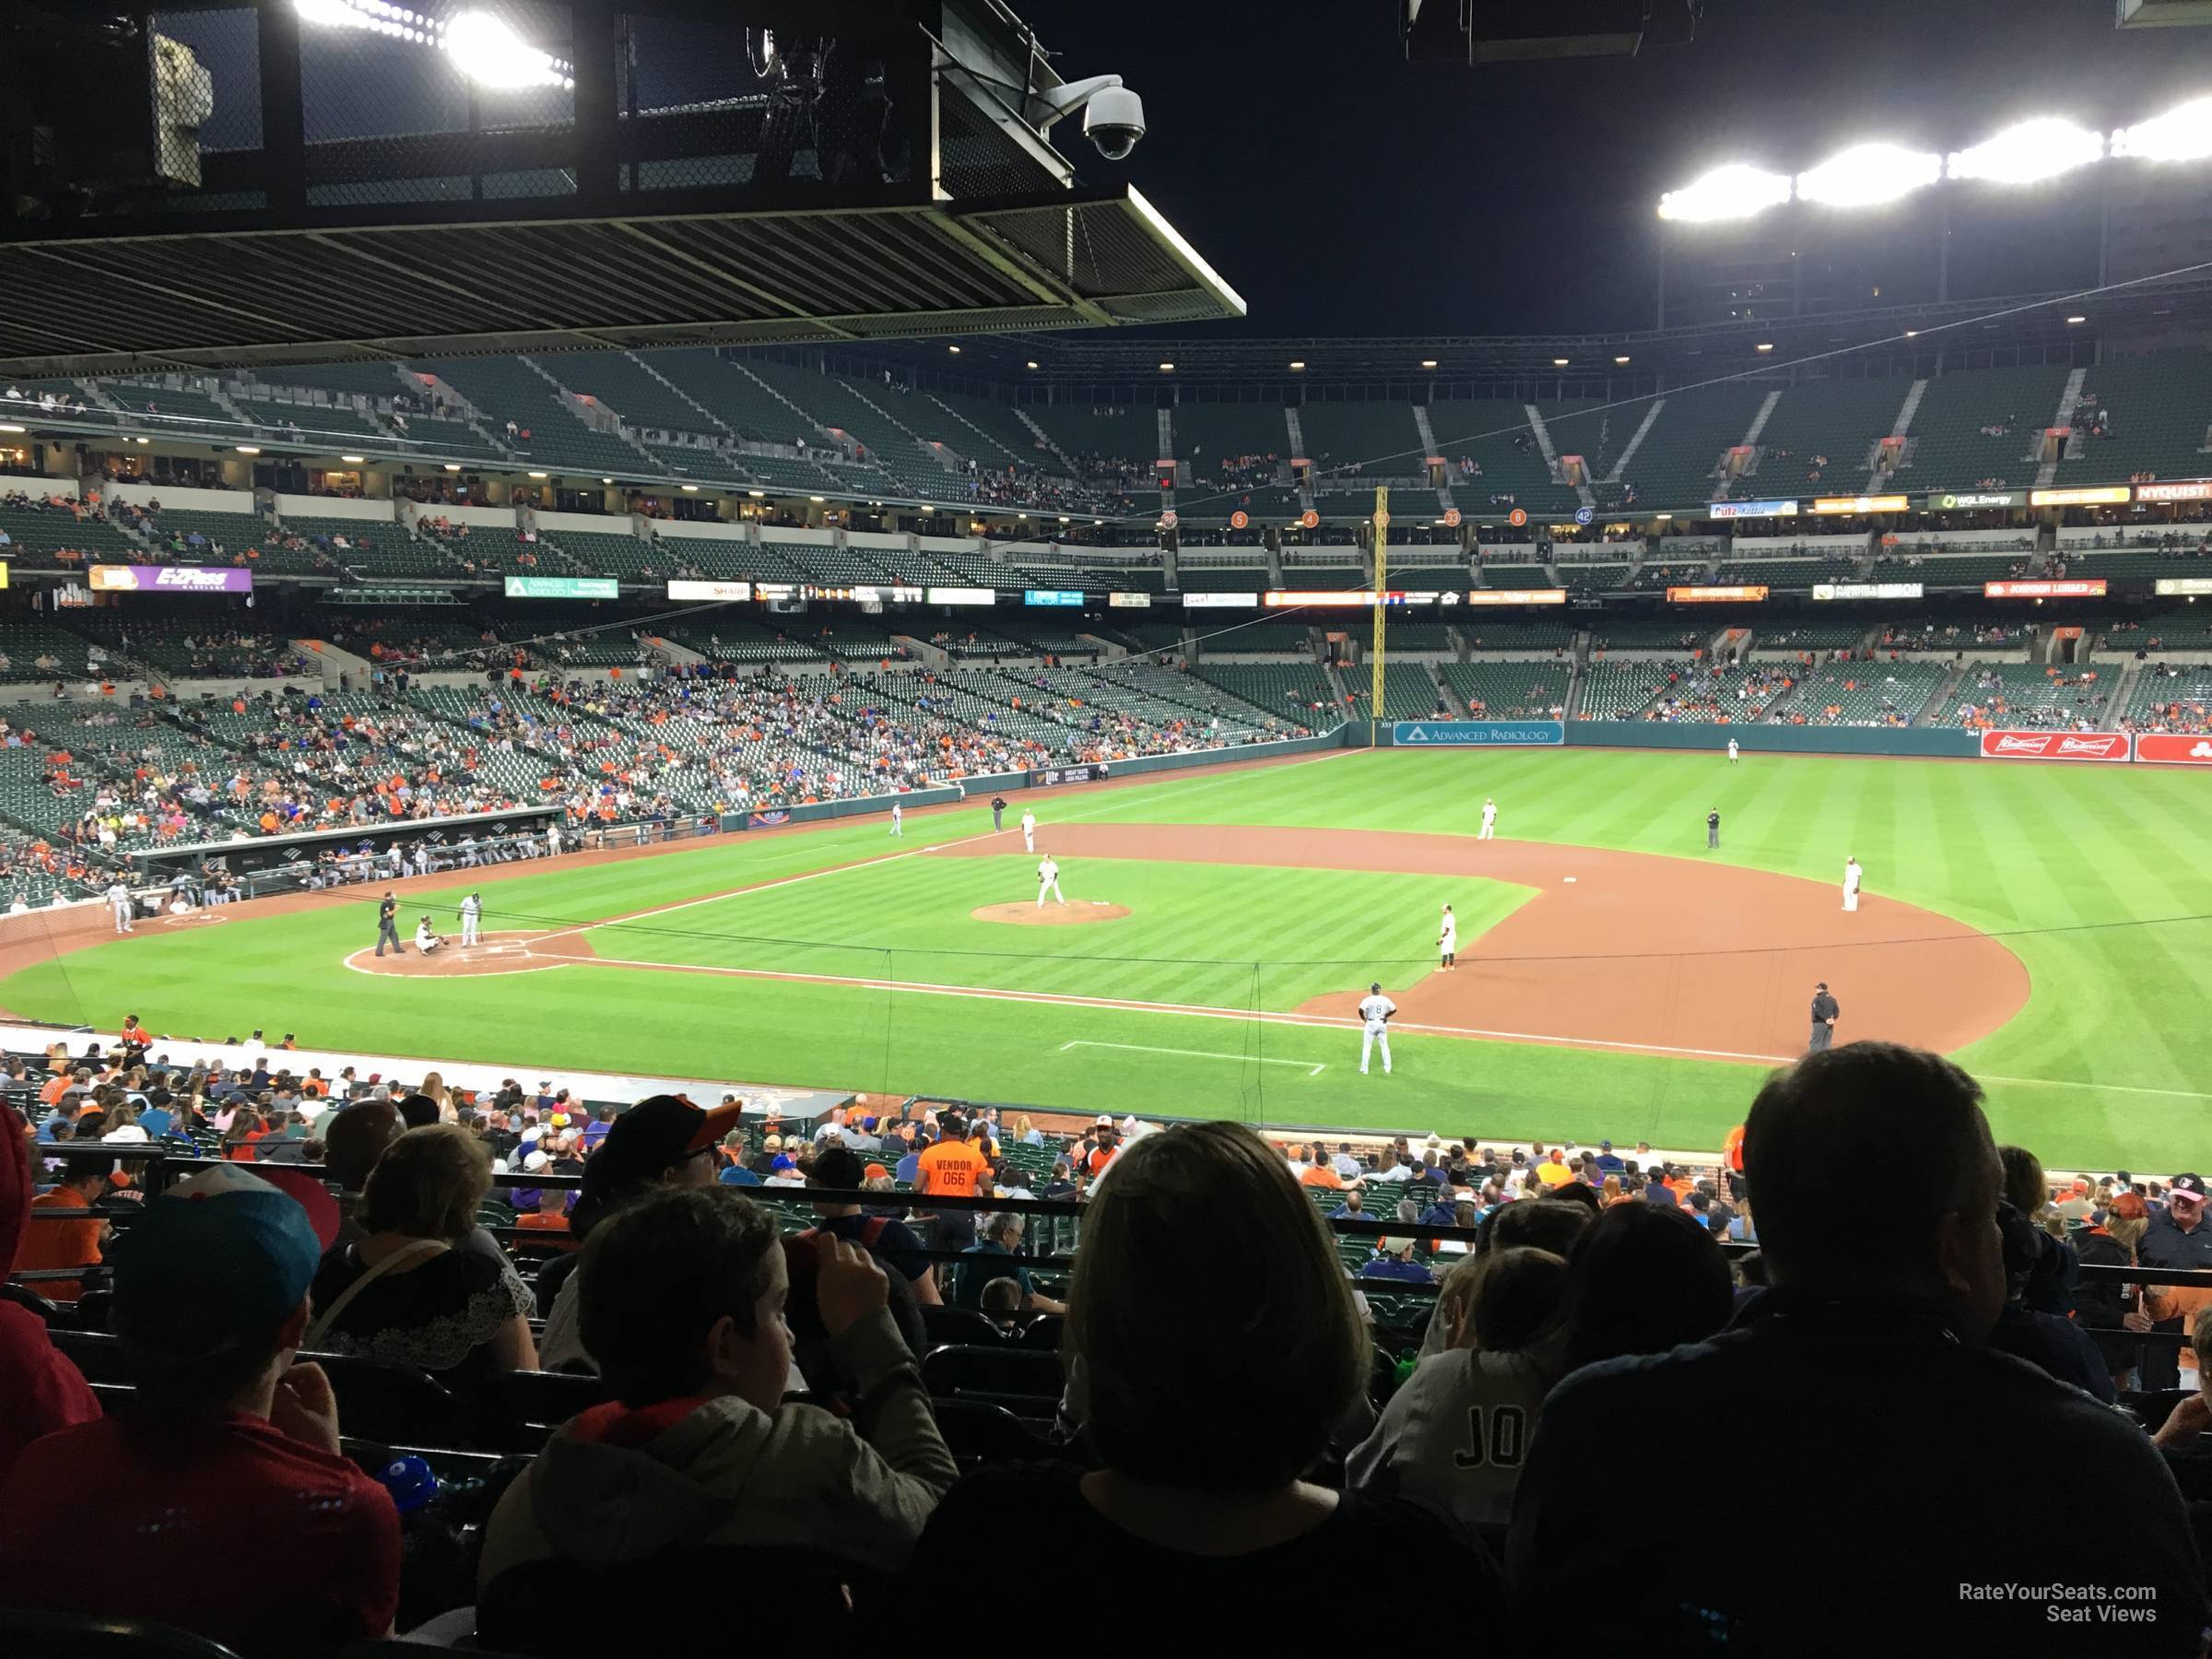 section 17, row 10 seat view  - oriole park